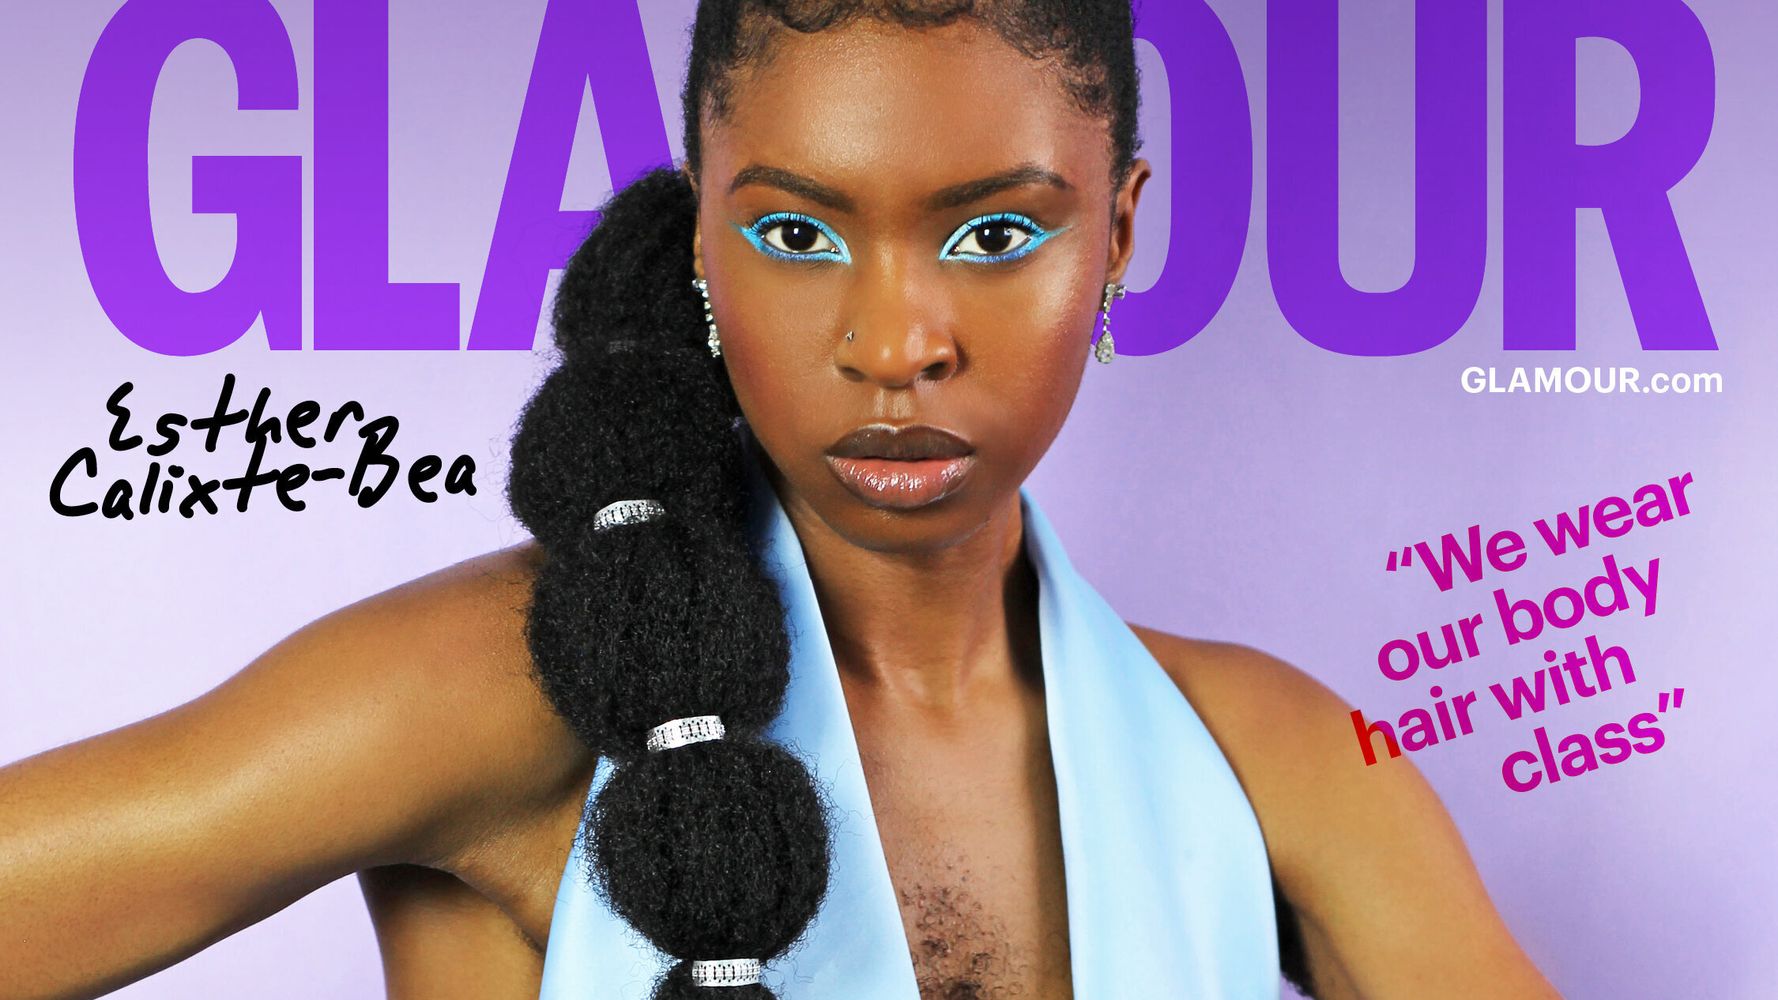 Quebec model embraces her chest hair and beauty in U.K. Glamour cover shoot